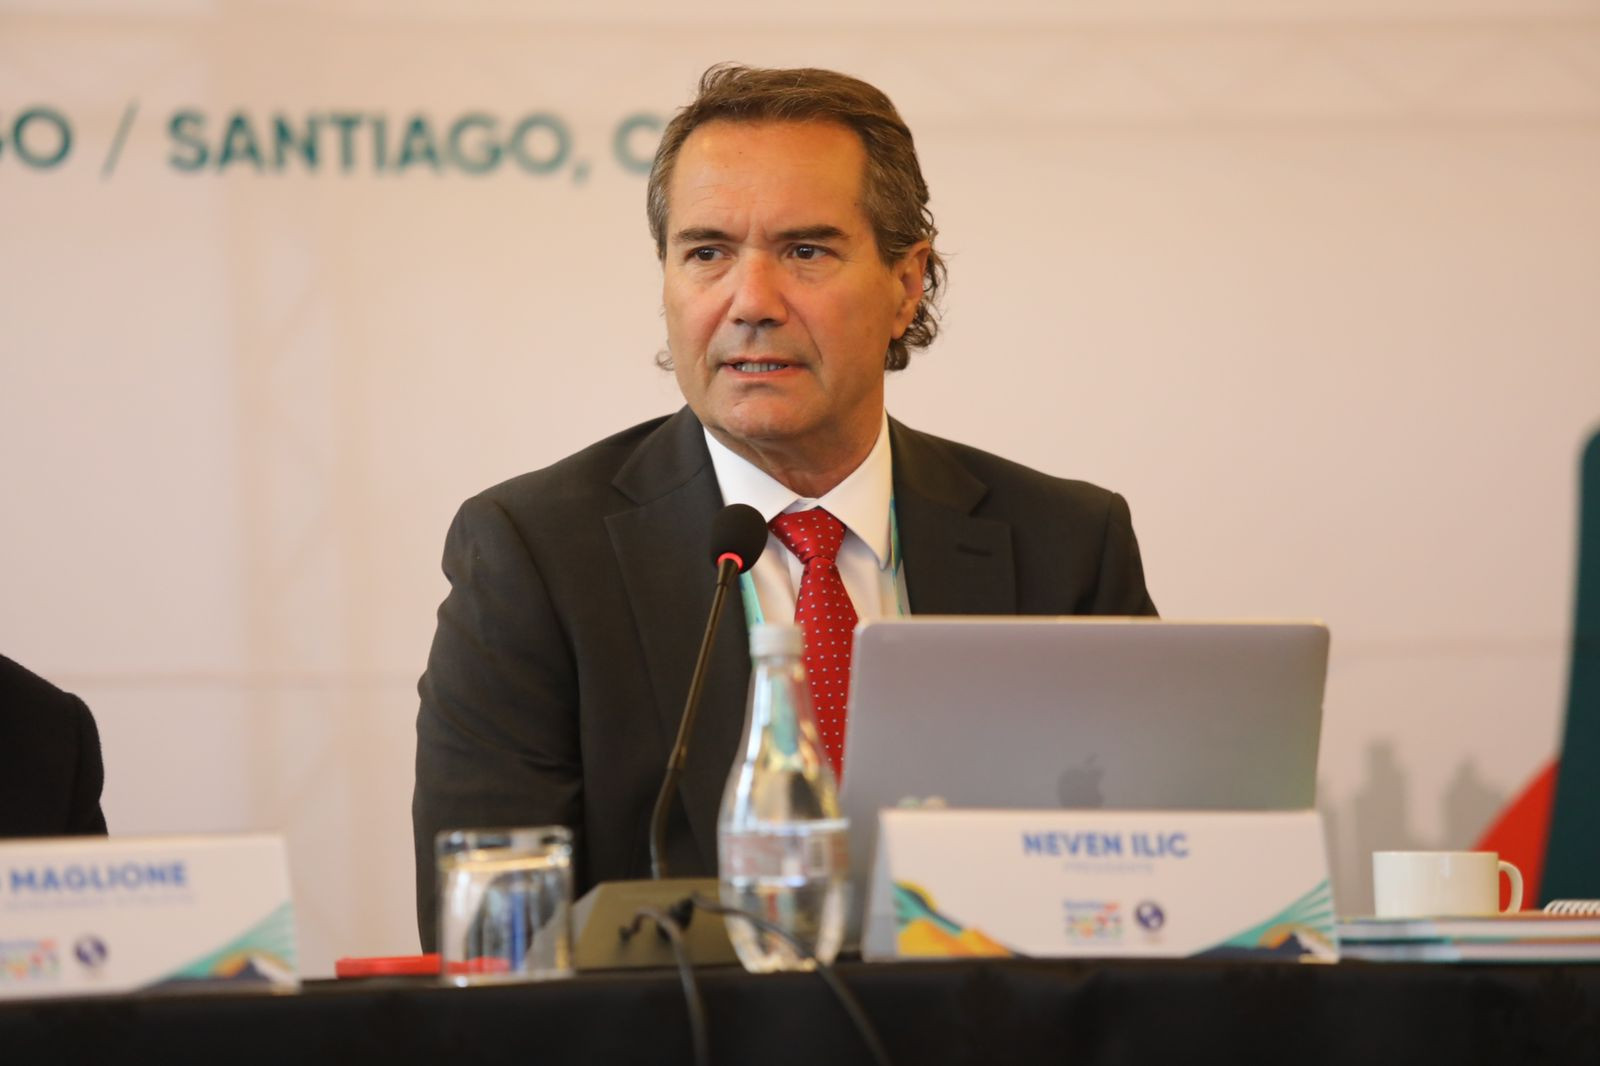 Panam Sports President Neven Ilic is poised to host the organisation's General Assembly over the next two days in Santiago ©Panam Sports